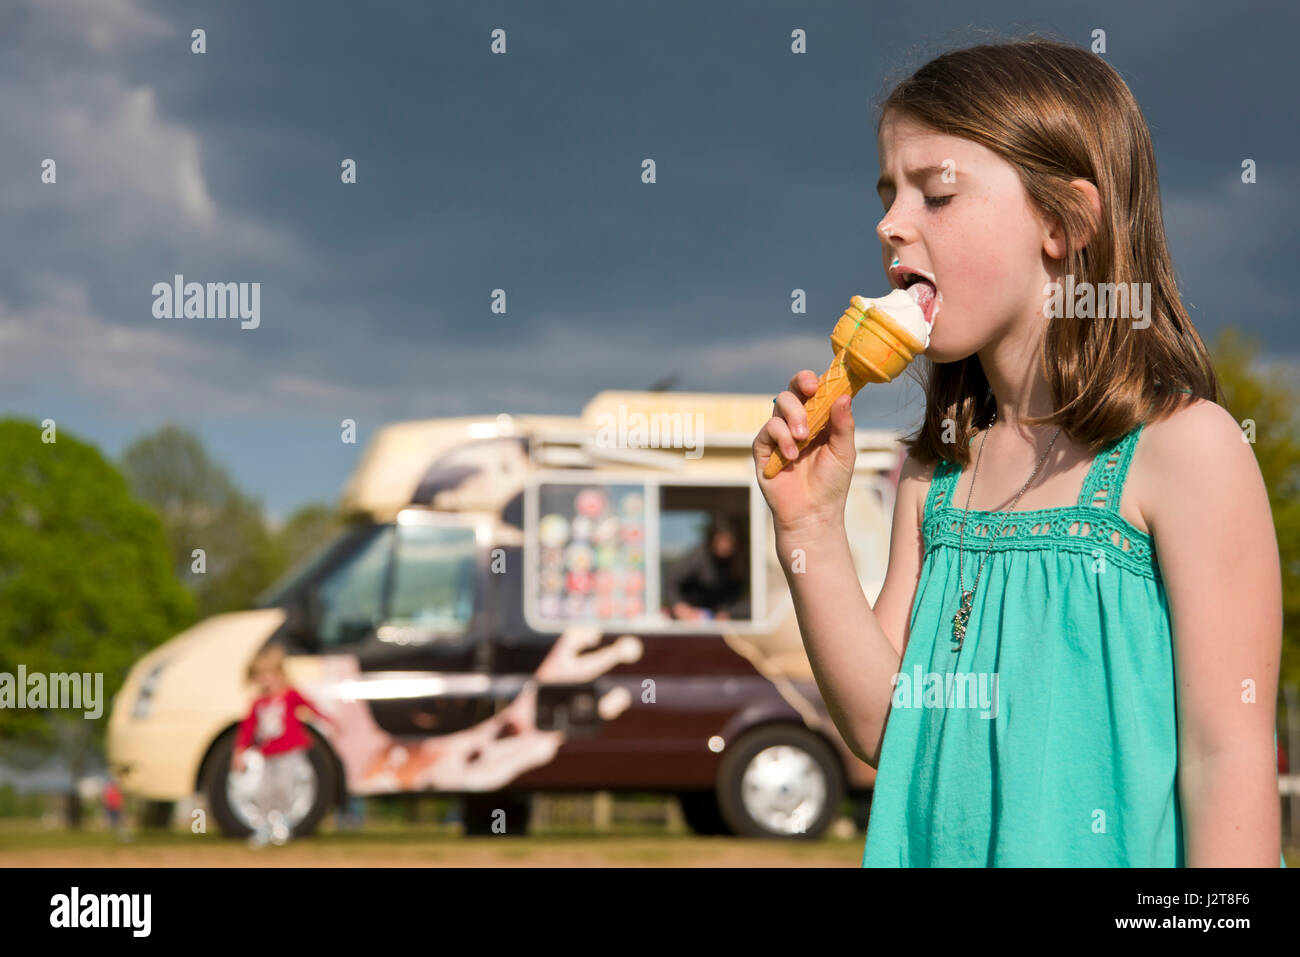 Horizontal portrait of a child eating ice cream in the sun. Stock Photo